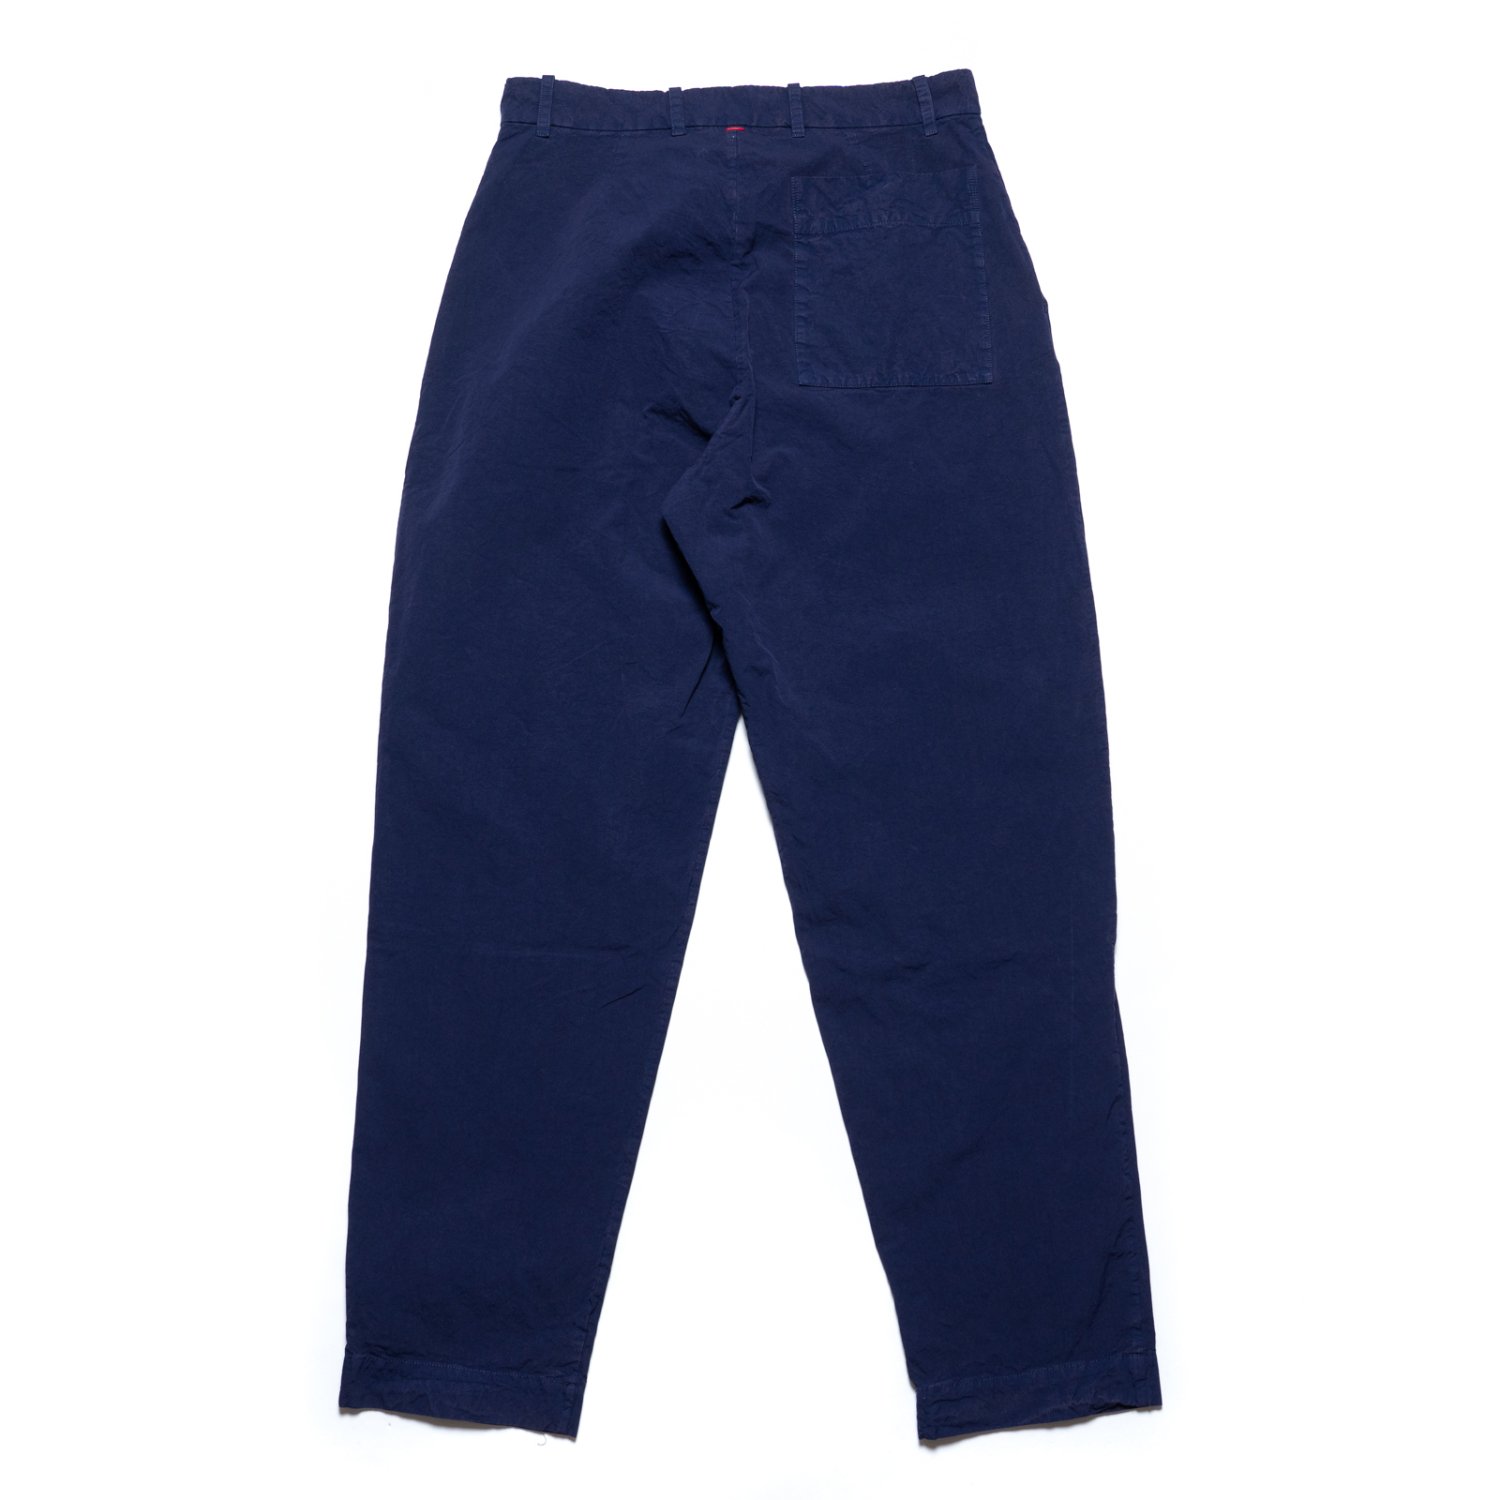 CASEY CASEY * STAPLES COLLECTION STH004 DOUBLE DYED AH PANT LCOT * Navy